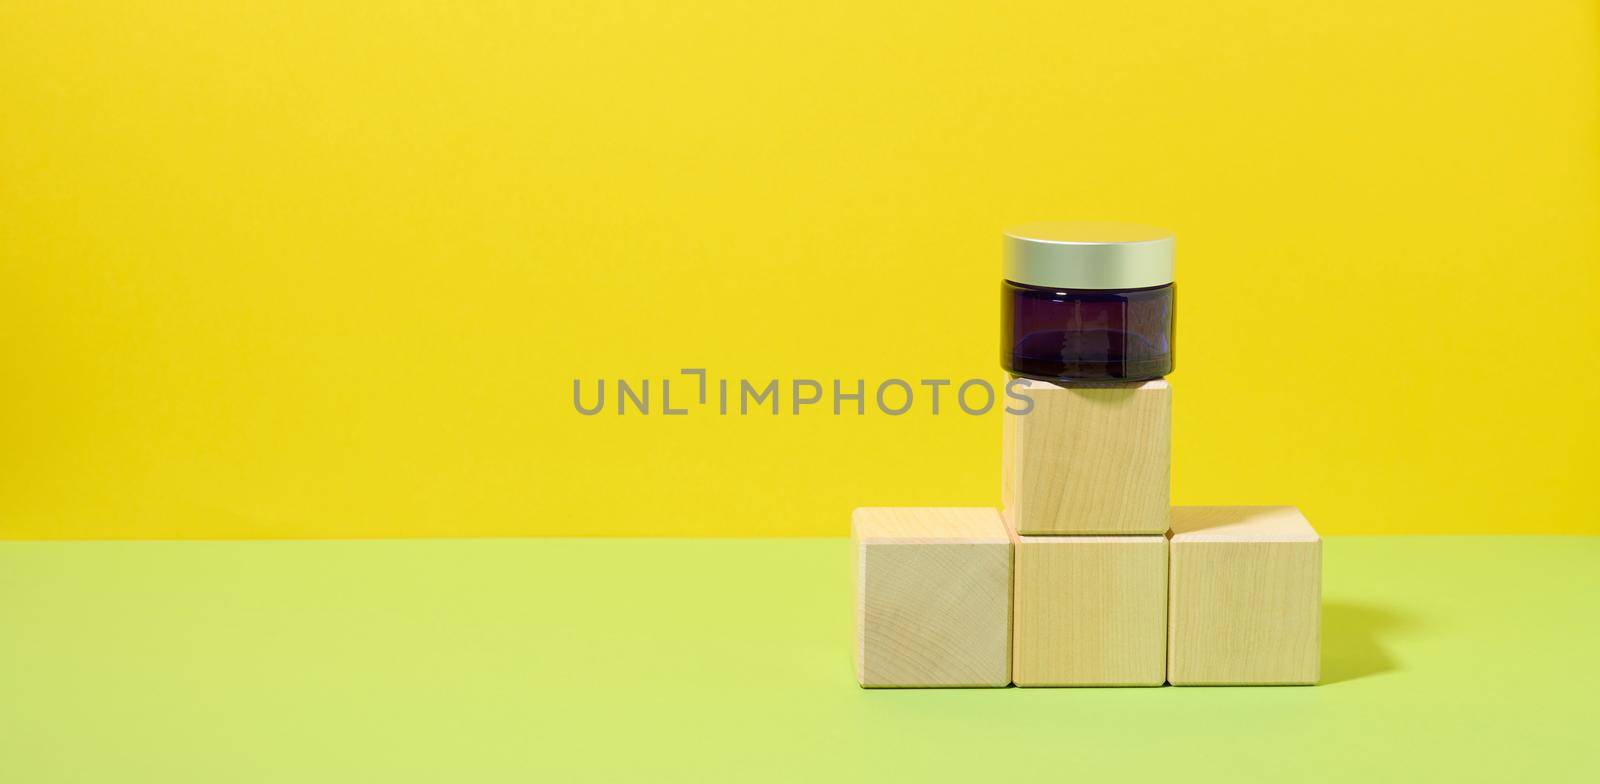 a blue glass jar with a gray lid stands on wooden cubes, yellow-green background. Cosmetic product display template by ndanko